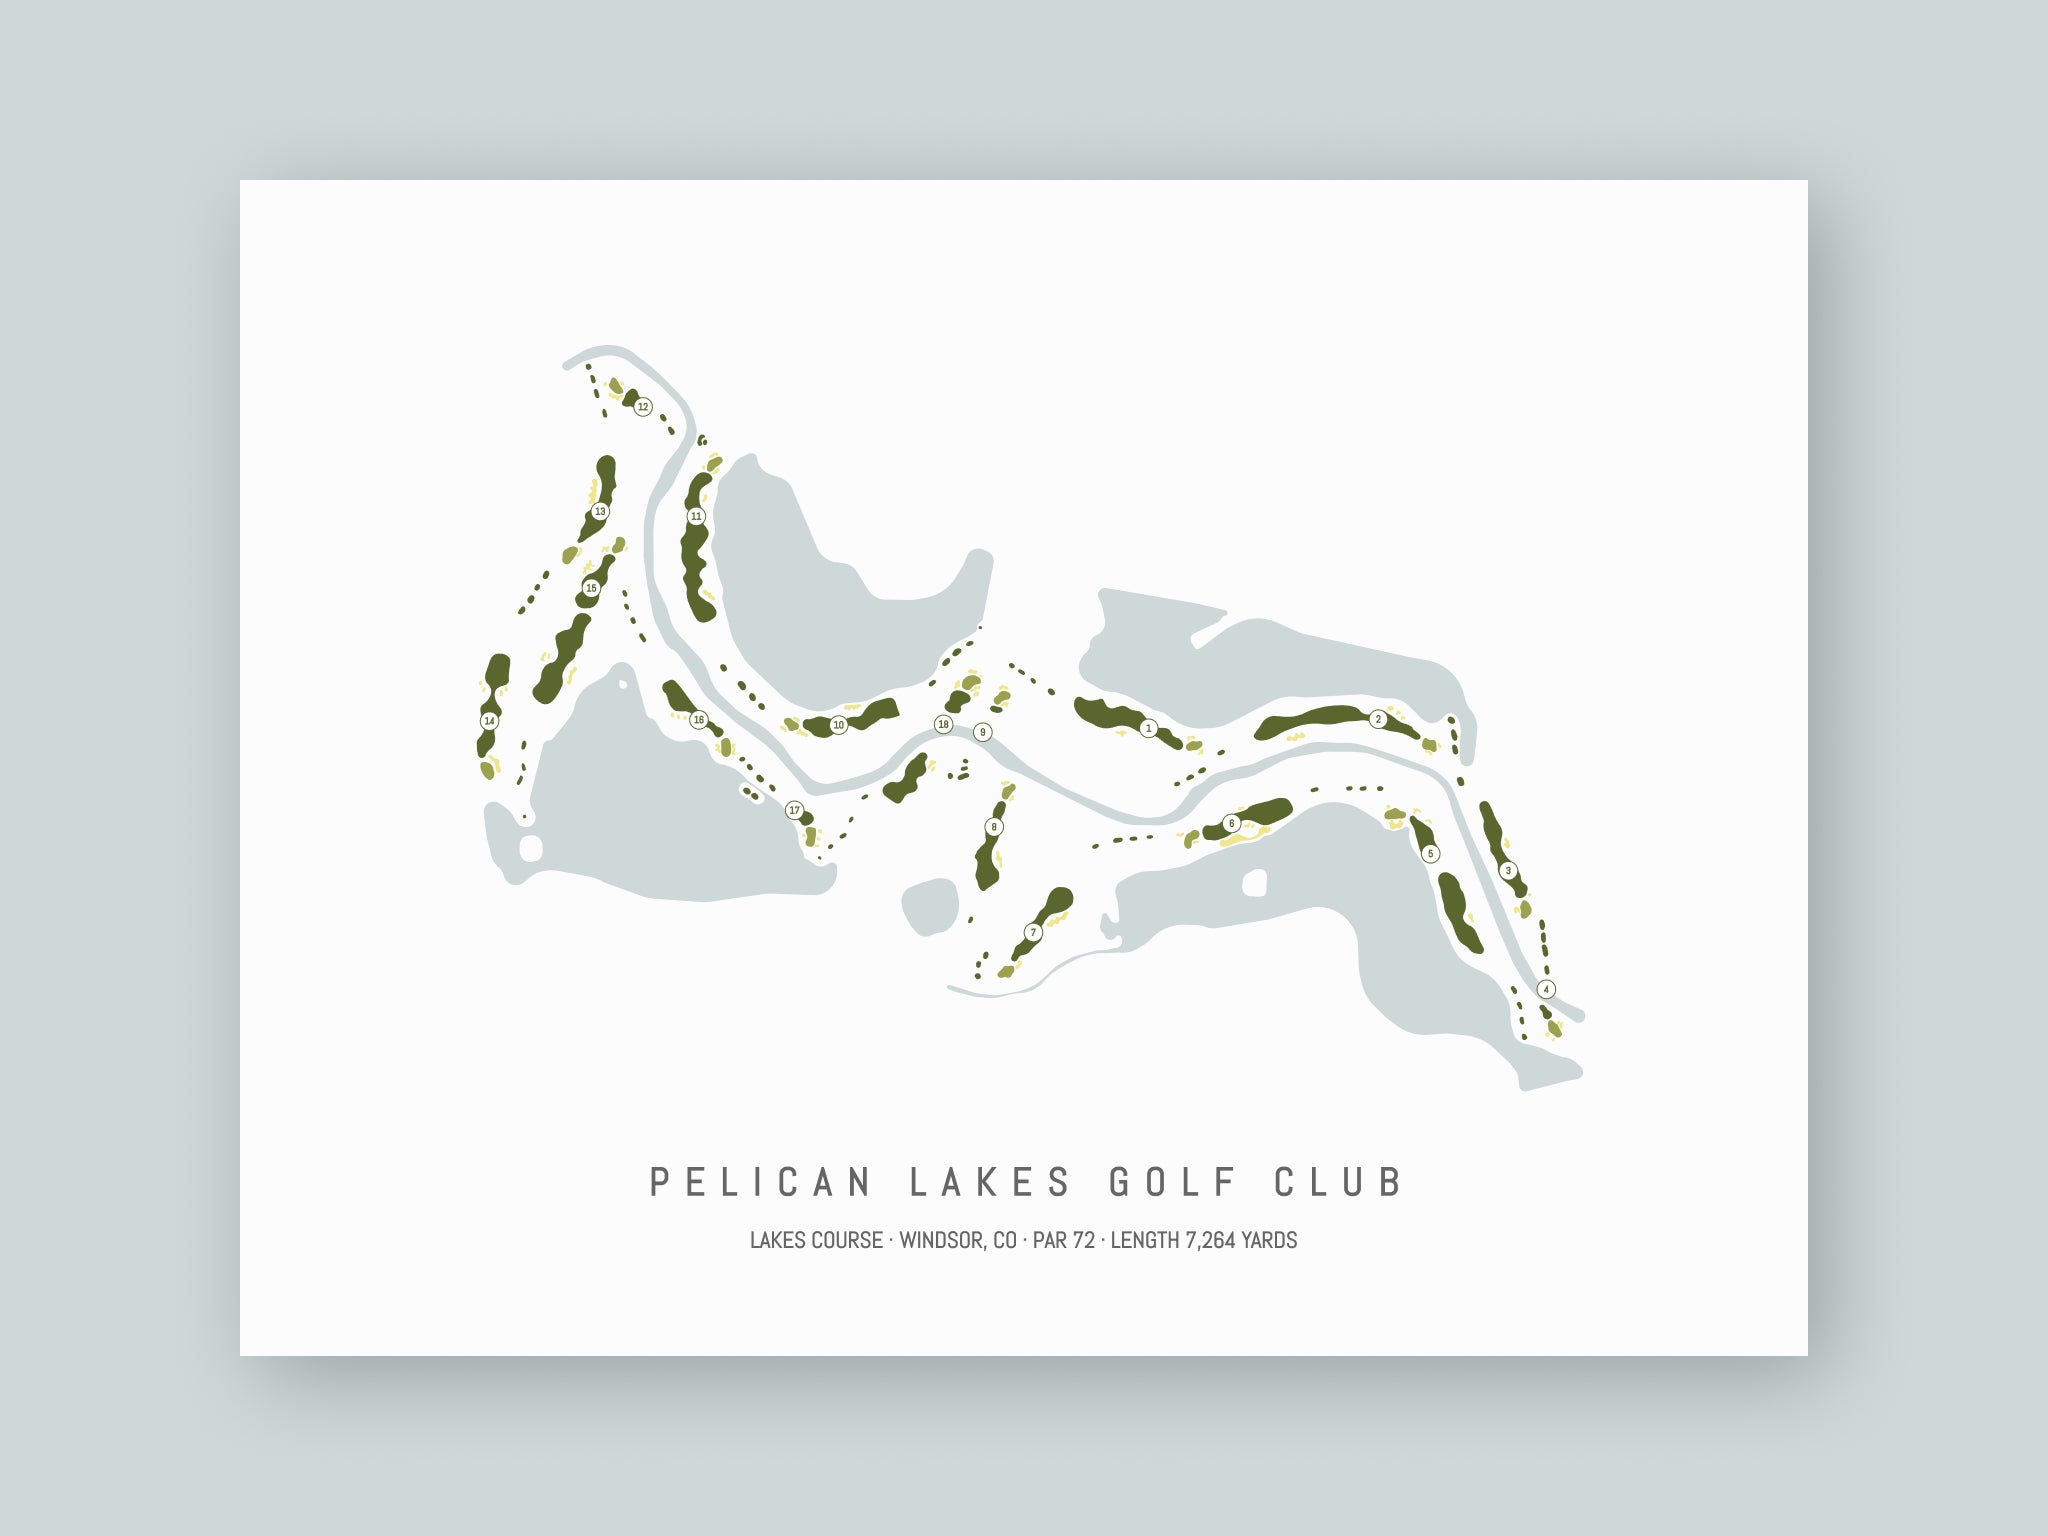 Pelican-Lakes-Golf-Club-Lakes-Course-CO--Unframed-24x18-With-Hole-Numbers